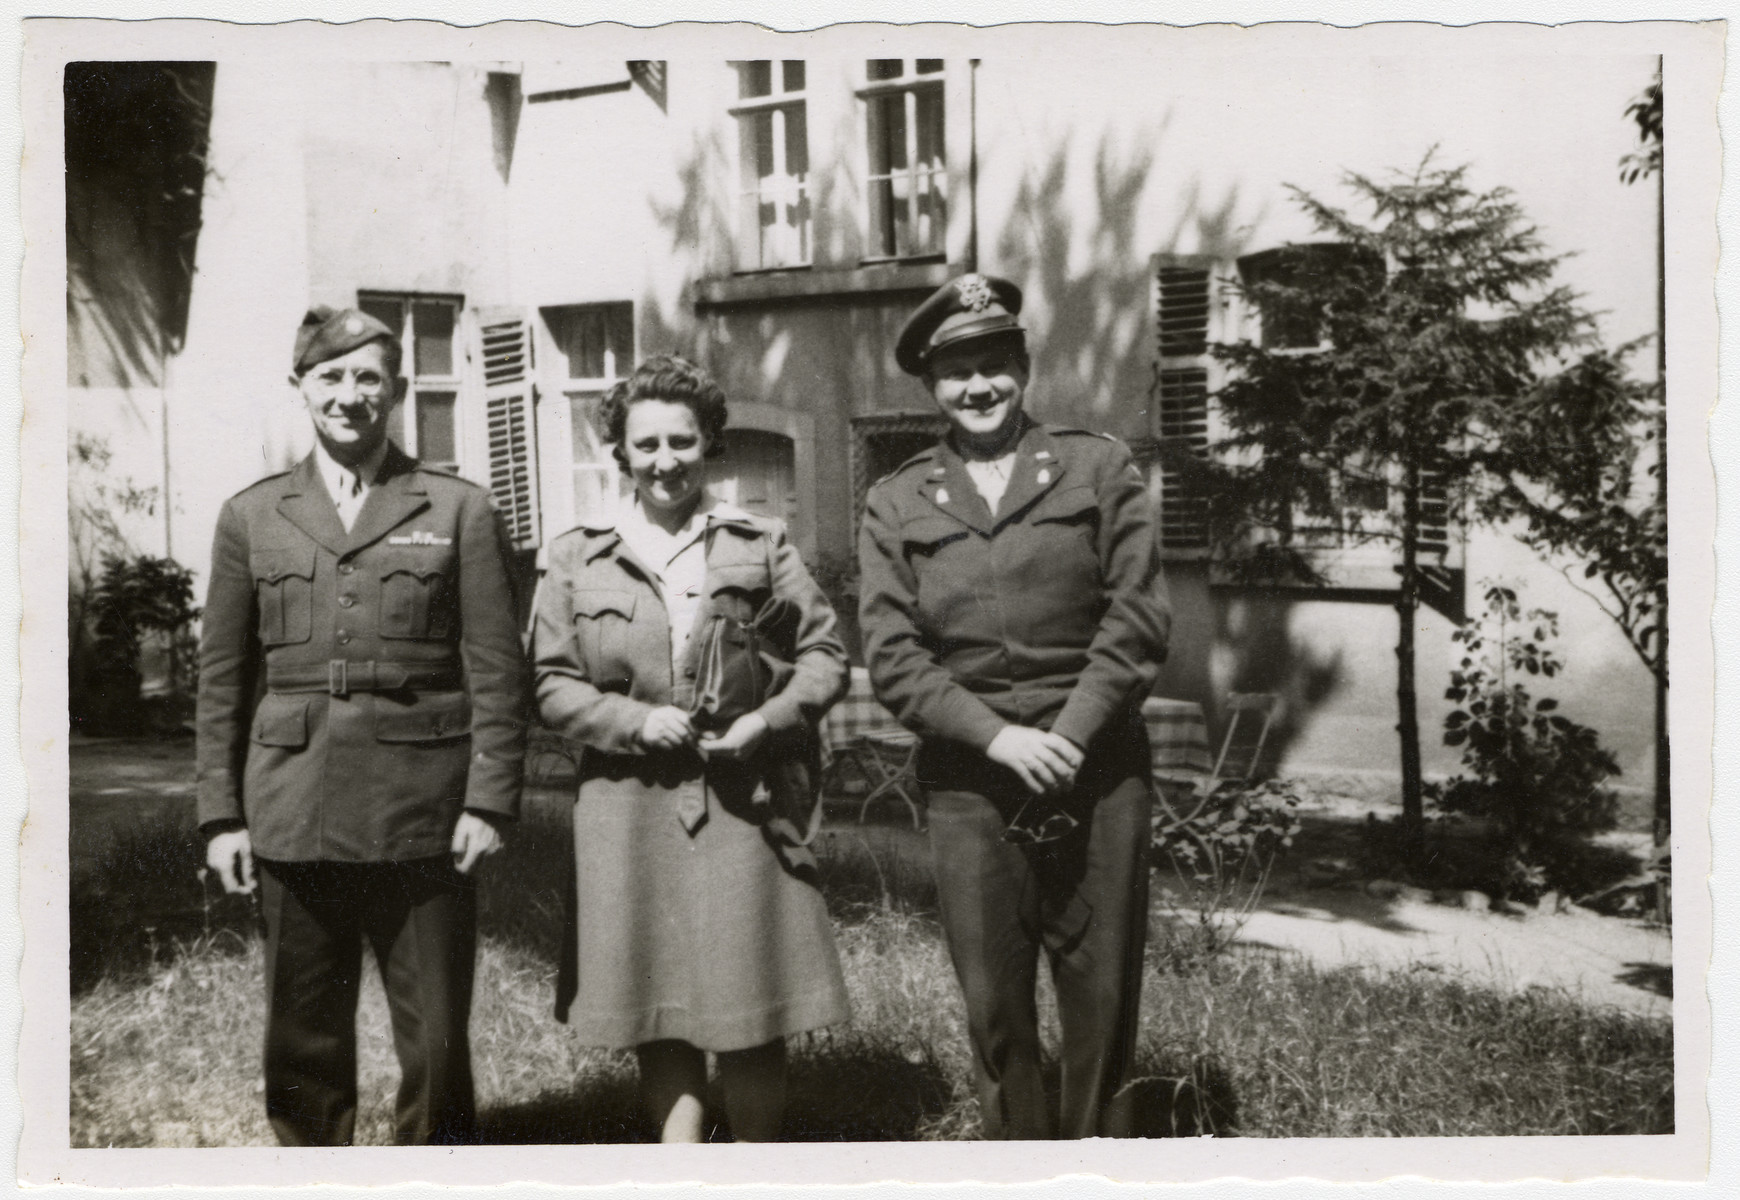 Portrait of three UNRRA staff members.

Mordecai Schwartz is on the left.  The original caption reads: "Military Mission to Camp"